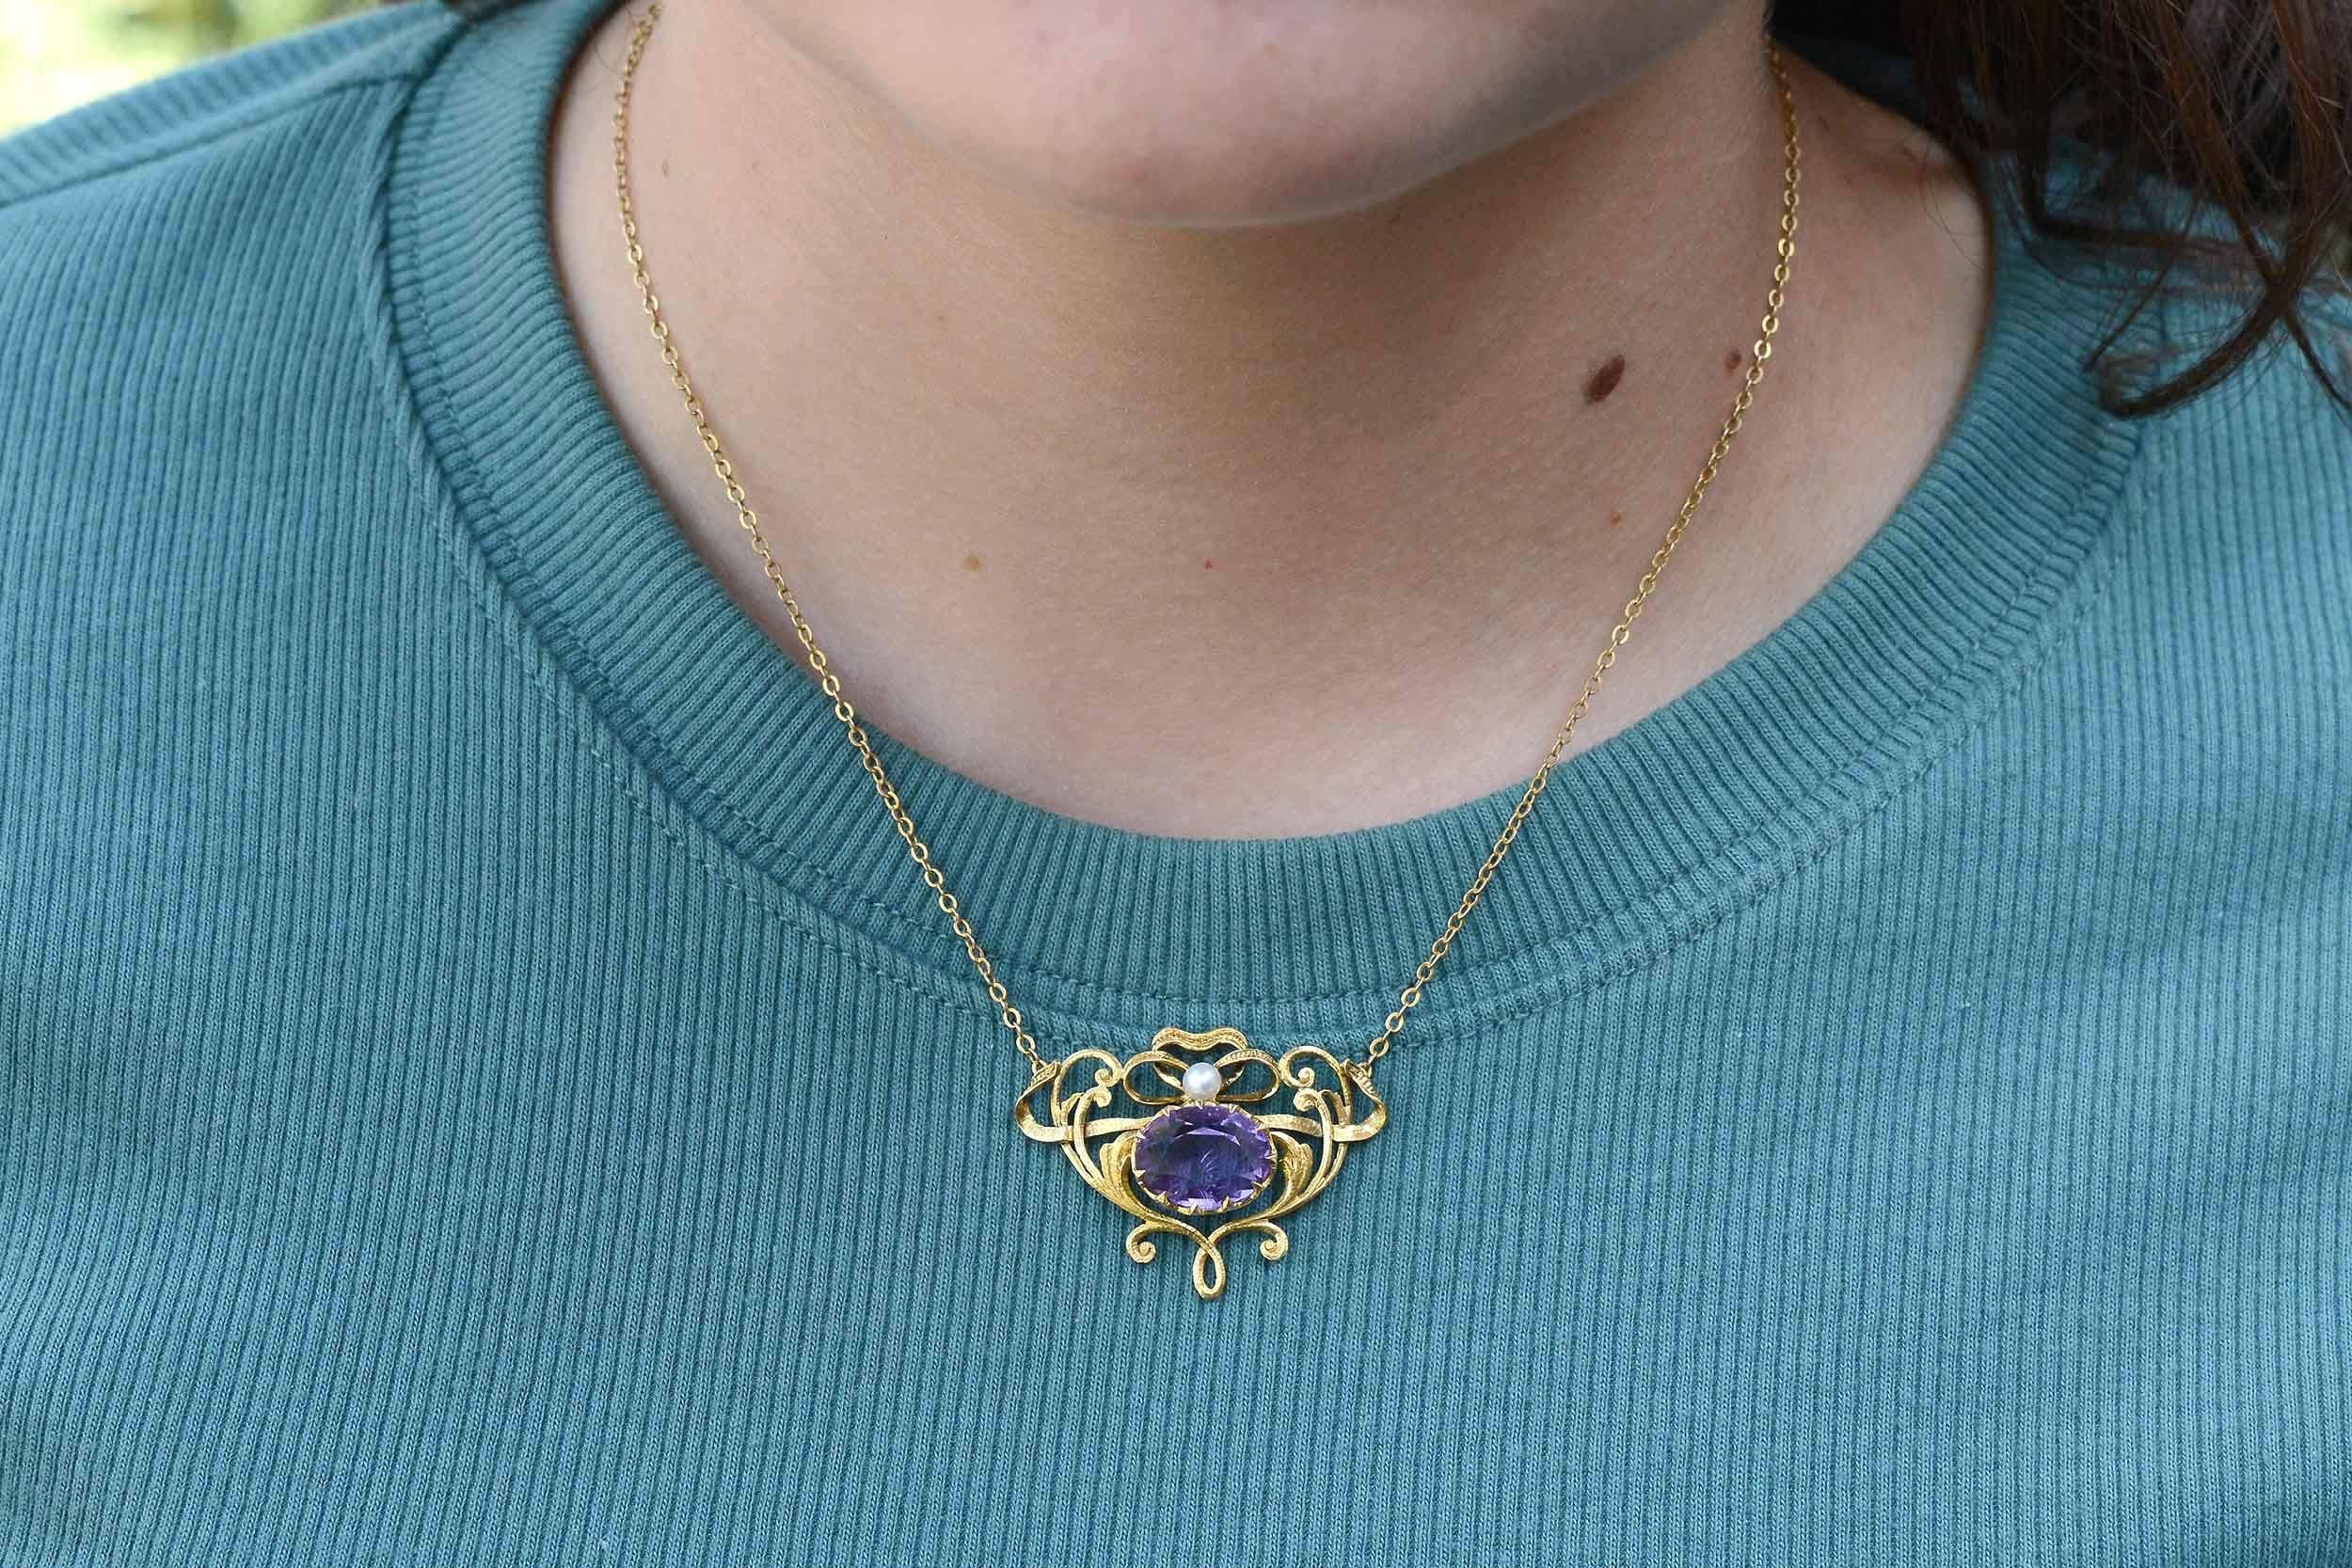 With sinuous, scrolling, flowing vines, this authentic antique Art Nouveau amethyst necklace is a dynamic and naturalistic accessory. A masterpiece circa 1910, hand fabricated of buttery 14k yellow gold with raised fretwork vines terminating with a